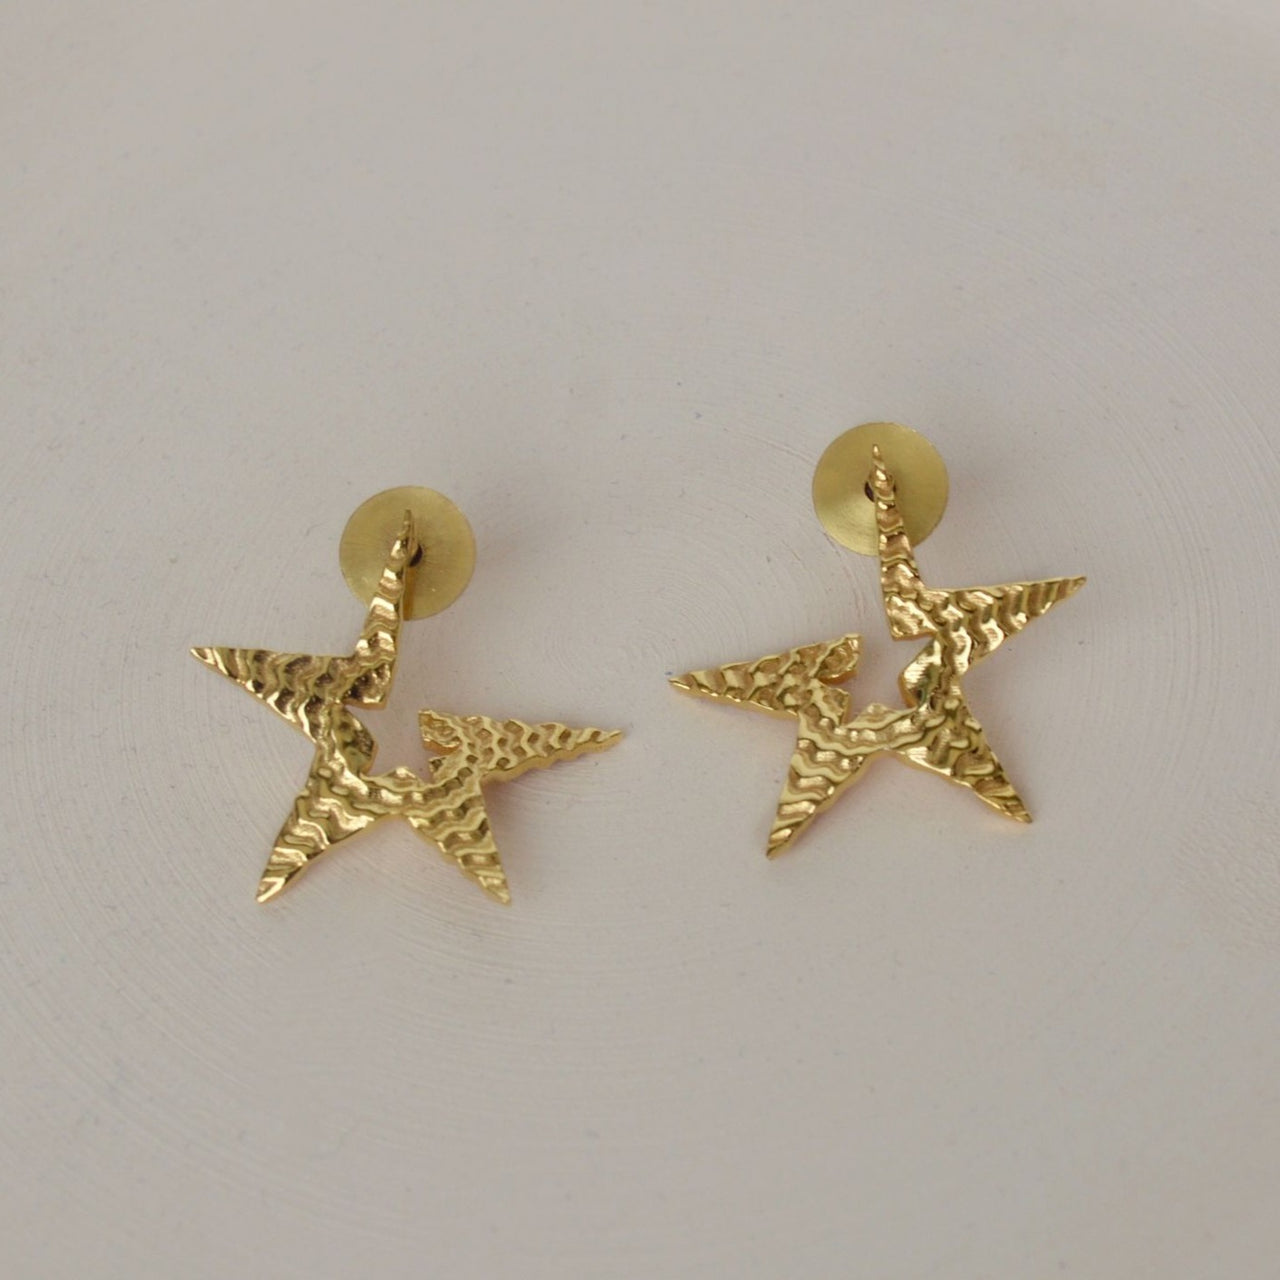 Gold covering earrings online shopping in india